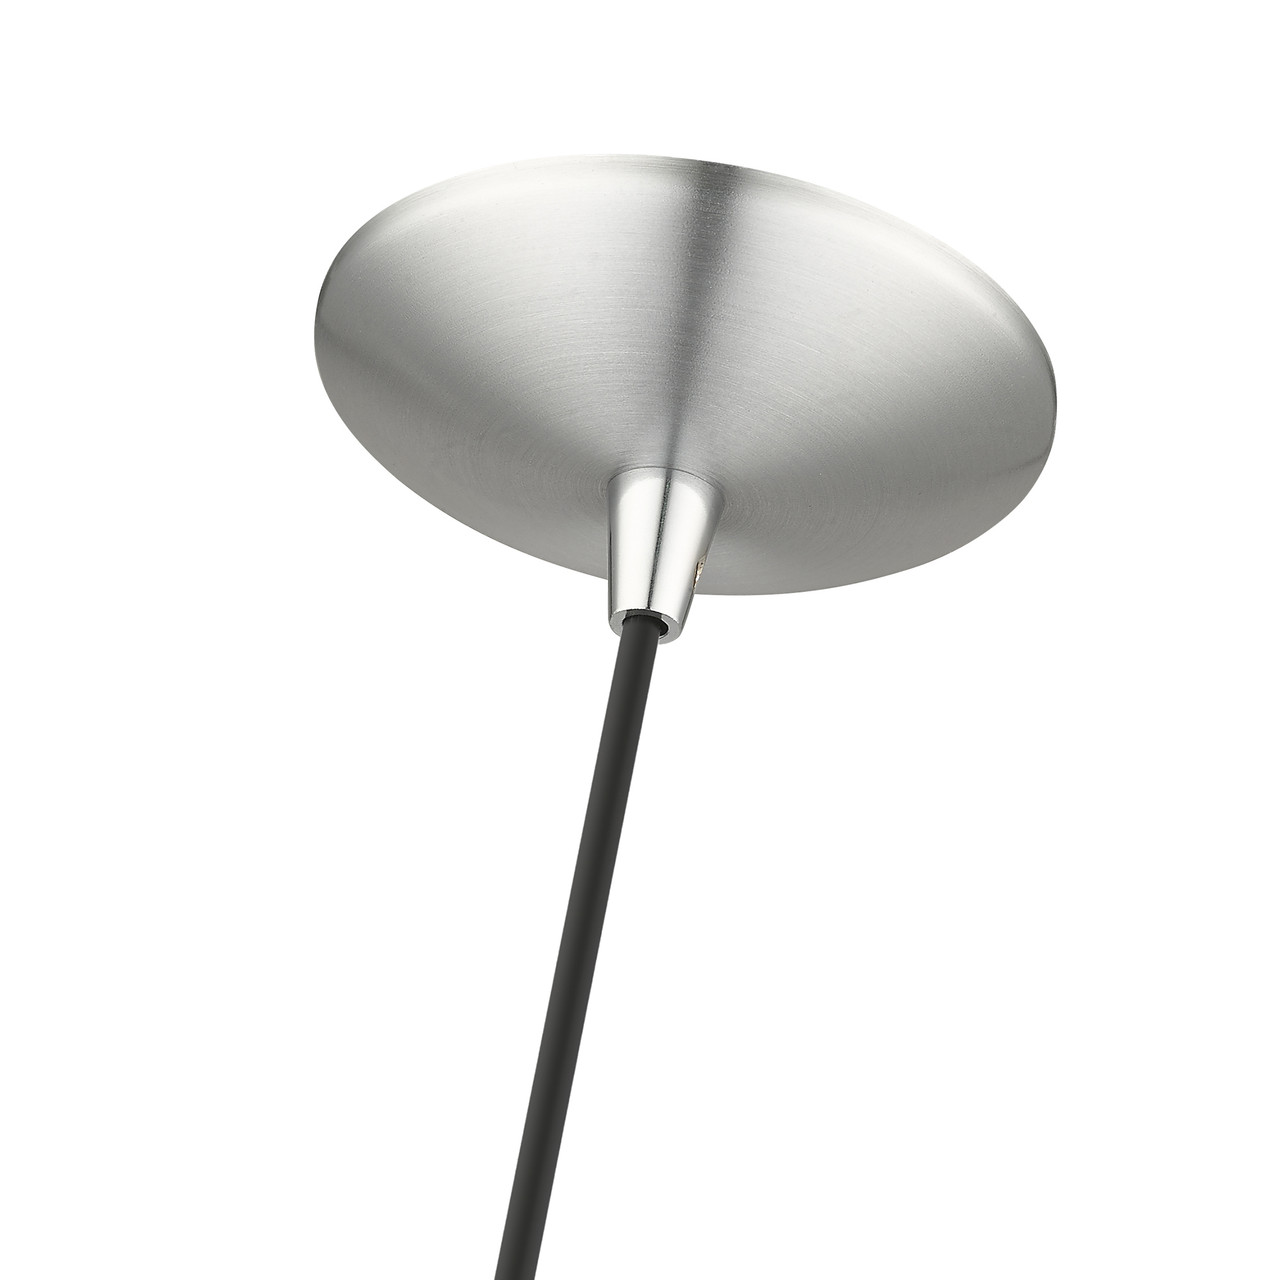 LIVEX LIGHTING 41492-66 1 Light Brushed Aluminum Cone Pendant with Polished Chrome Accents